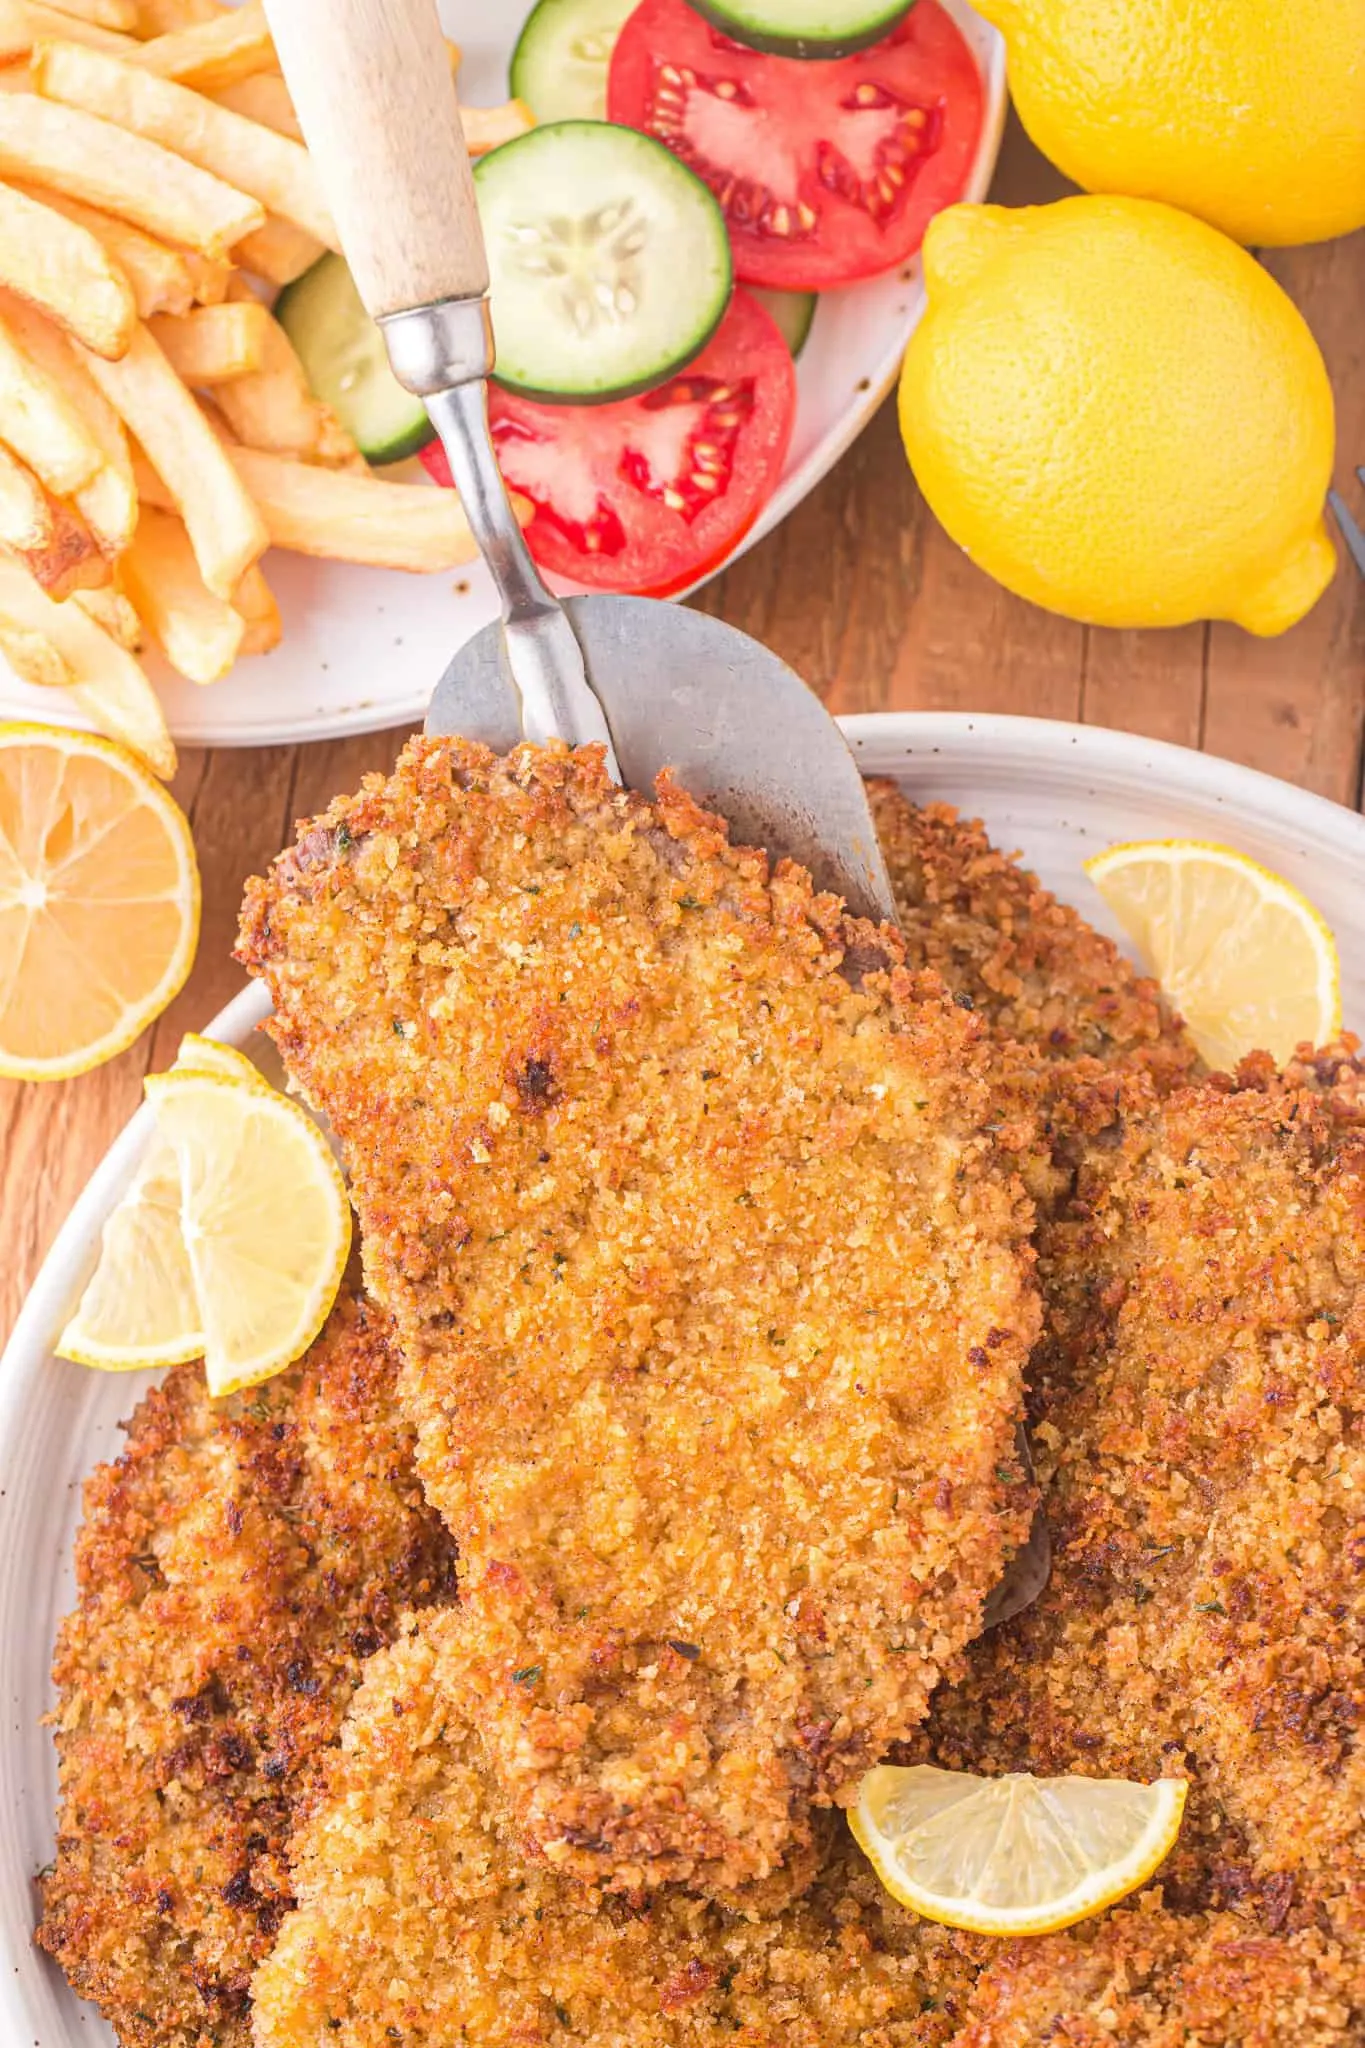 Beef Milanesa is a fried steak recipe using thinly sliced beef, breaded and fried until golden brown and crispy.